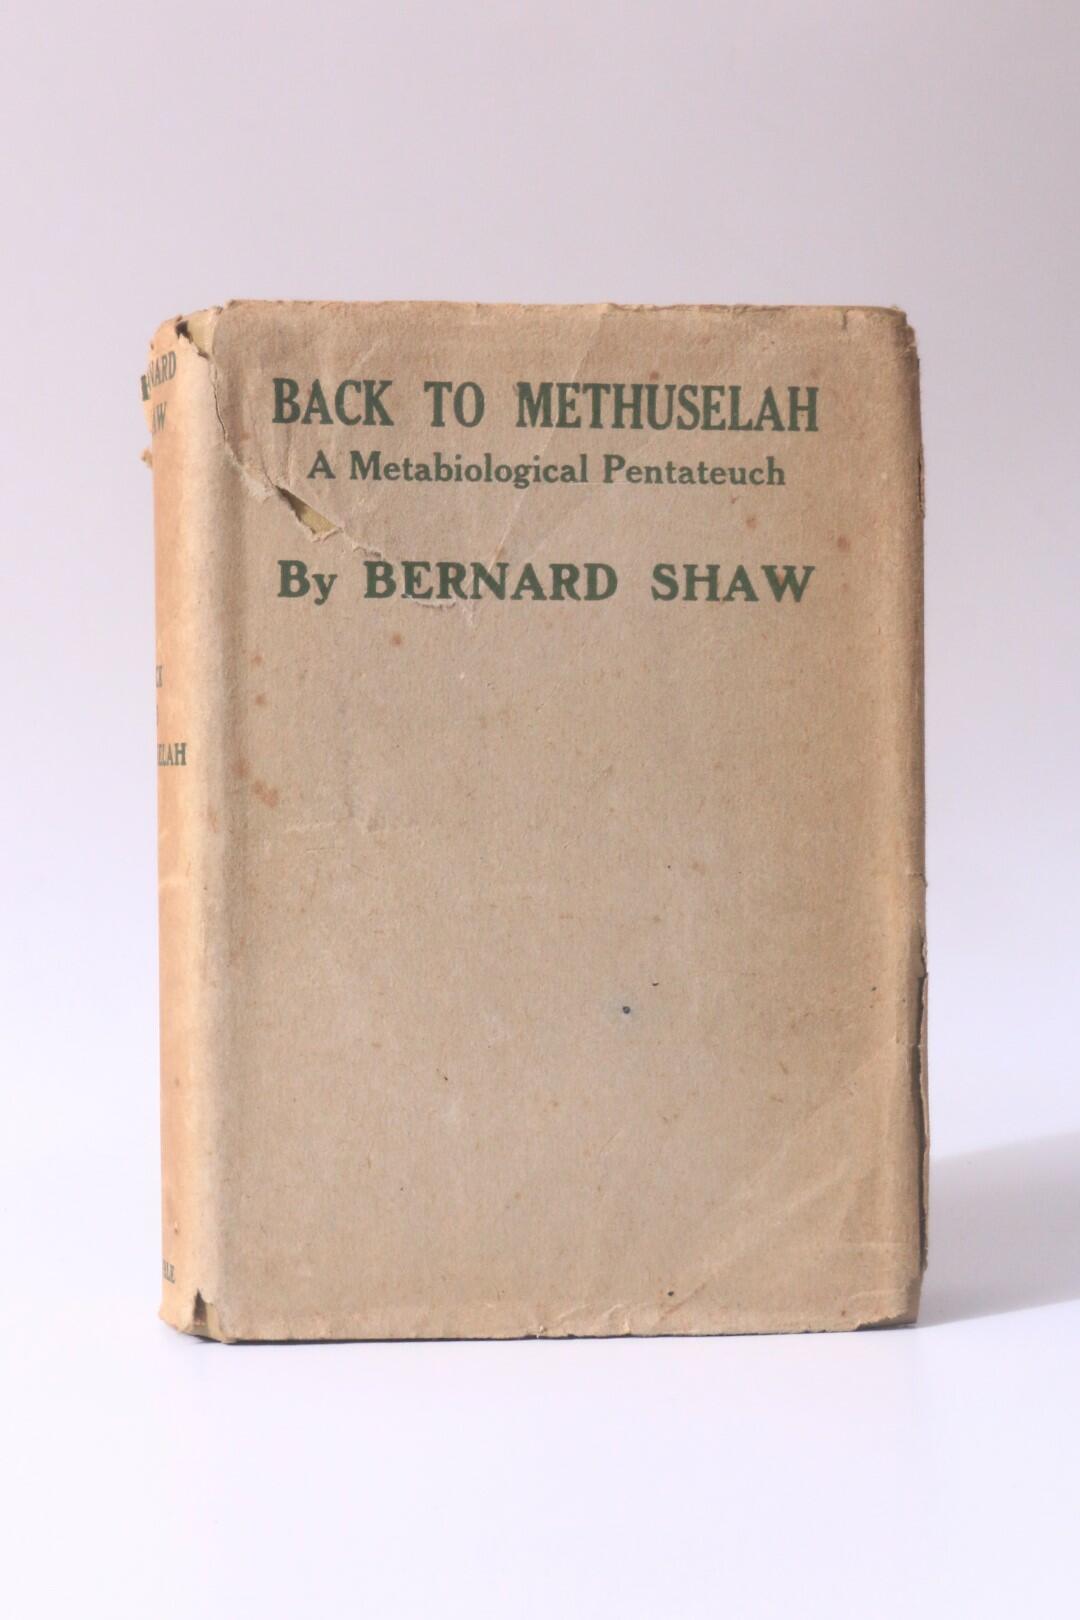 Bernard Shaw - Back to Methuselah: A Metabiological Pentateuch - Constable, 1921, First Edition.